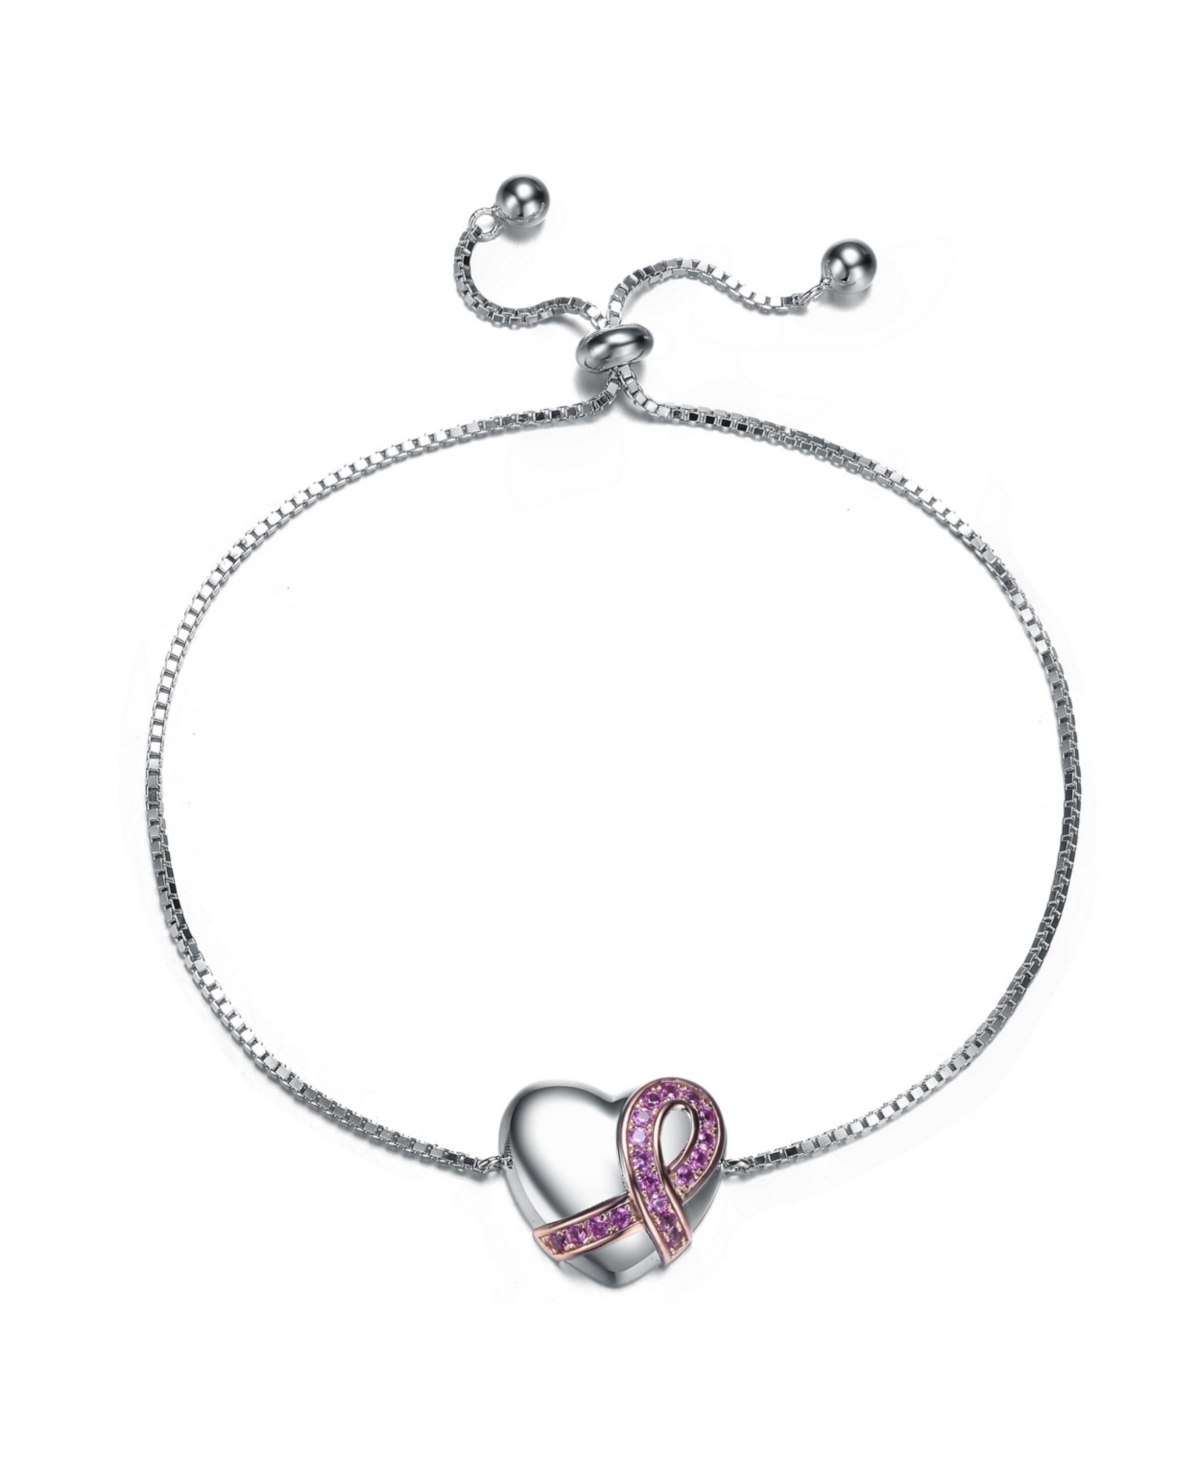 Gigi Girl Teens/Young Adults White Gold Plated with infinity Ribbon on Heart Adjustable Bracelet - Silver